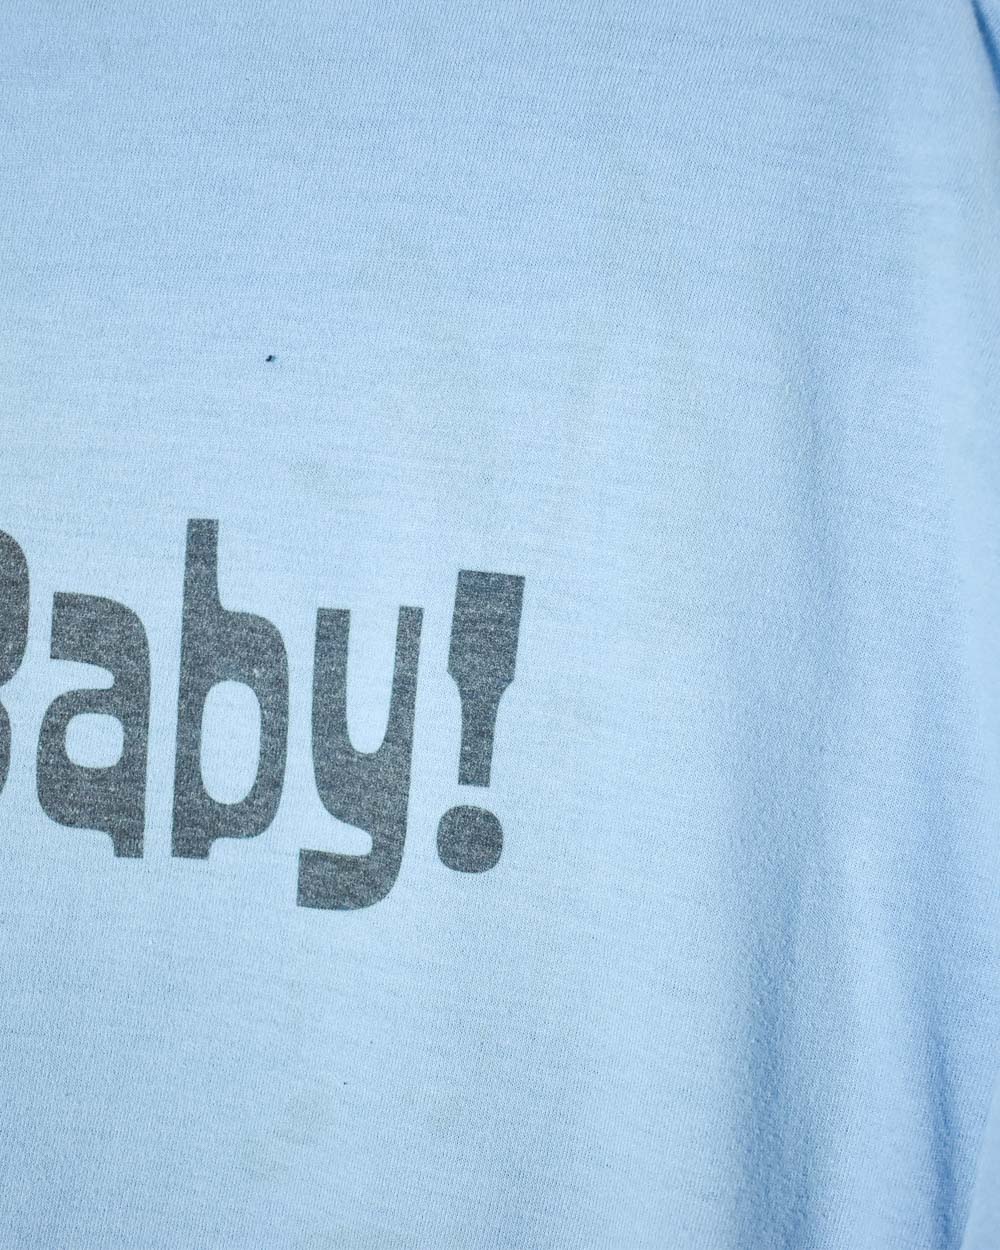 Baby I Bought My Rubber! Graphic T-Shirt - X-Large